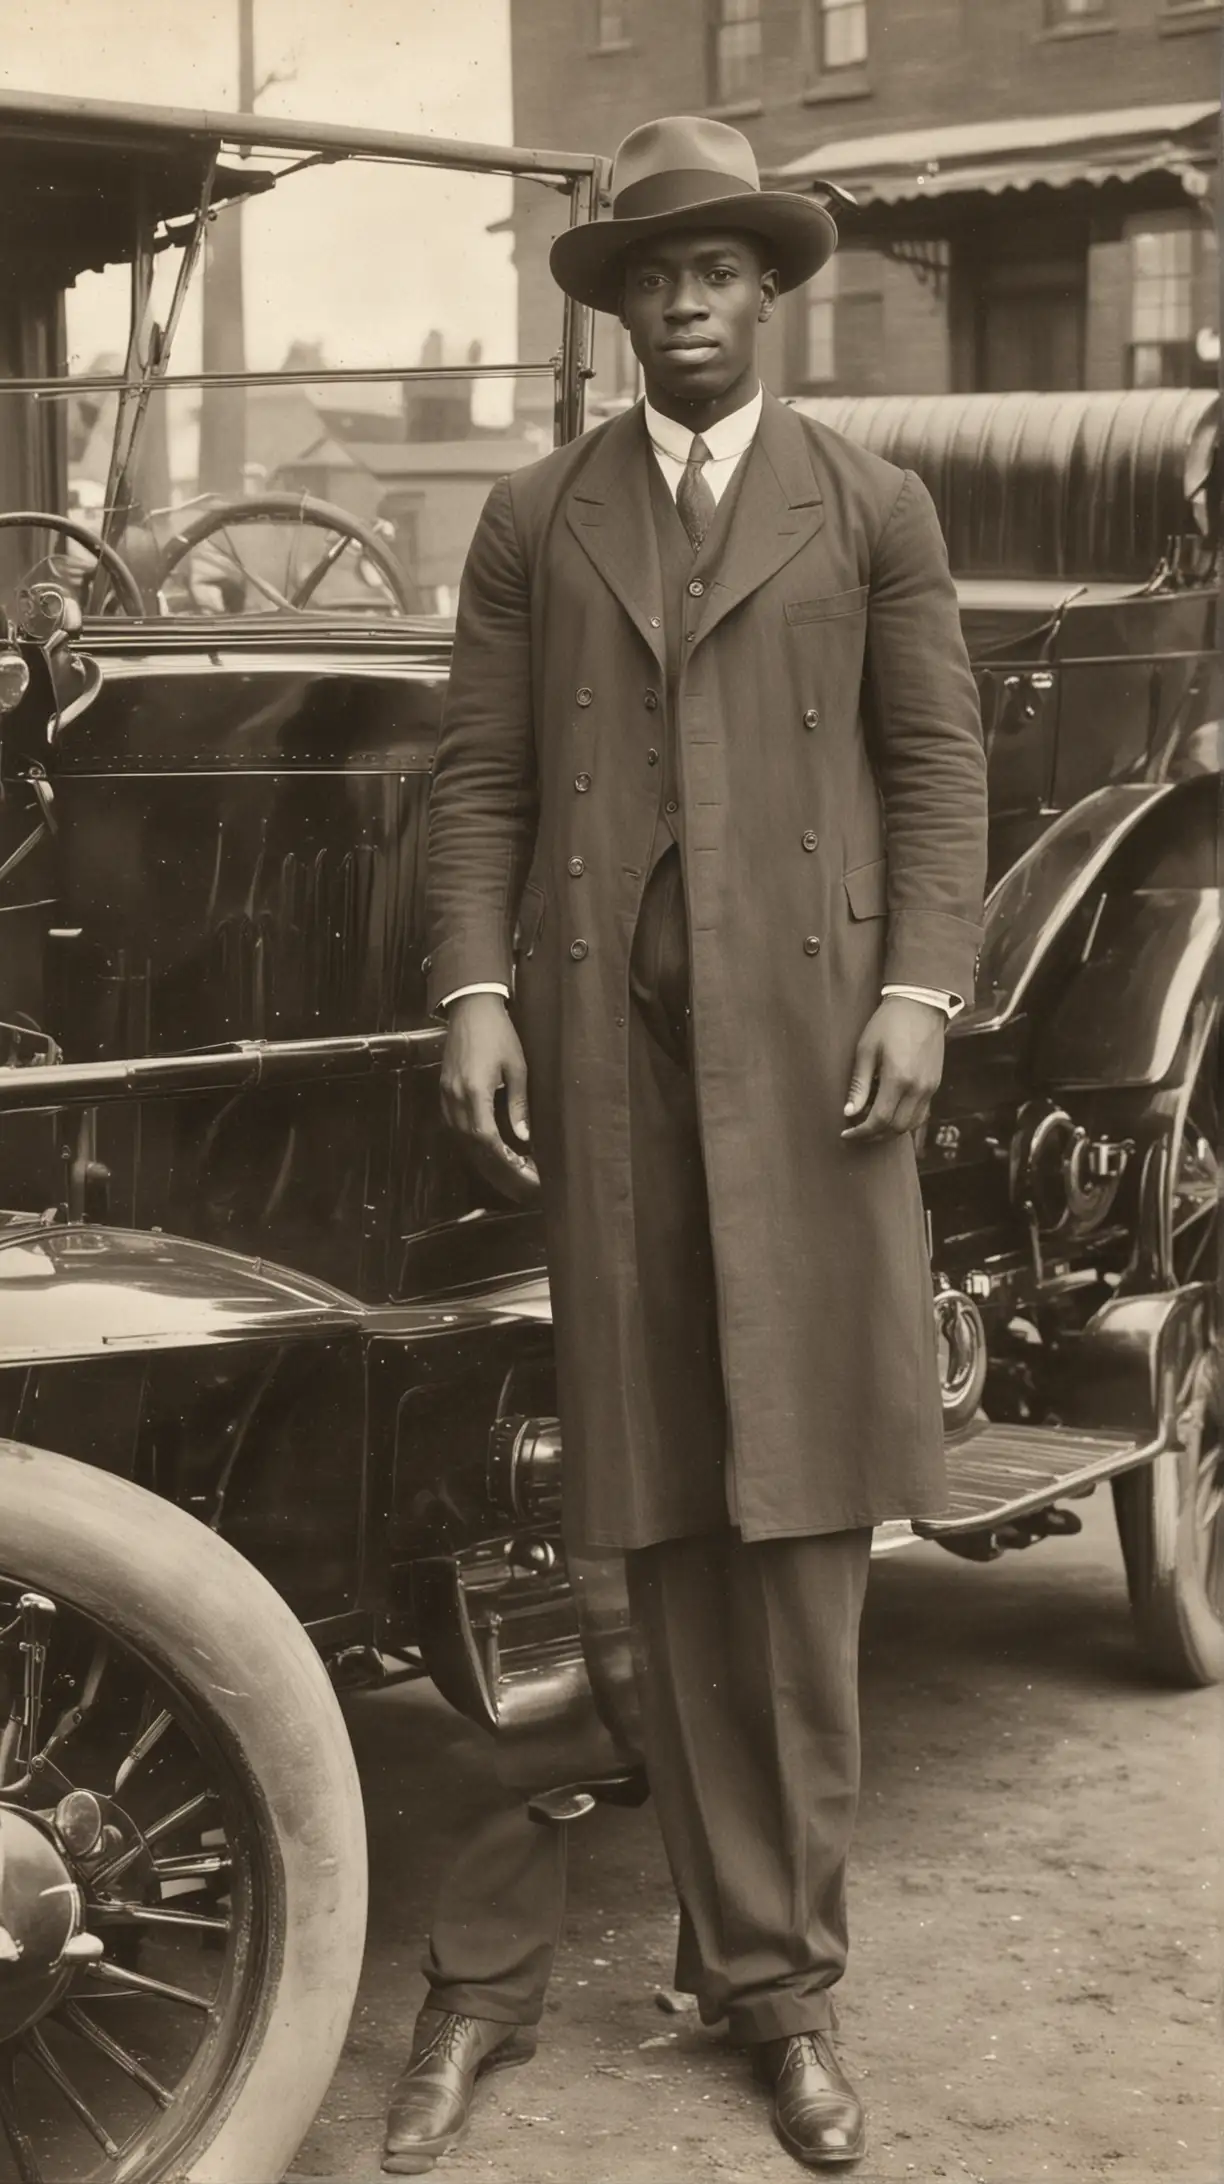 Far away picture of a Handsome Black man with hat on standing in front of a Patterson-Greenfield automobile of 1915. 